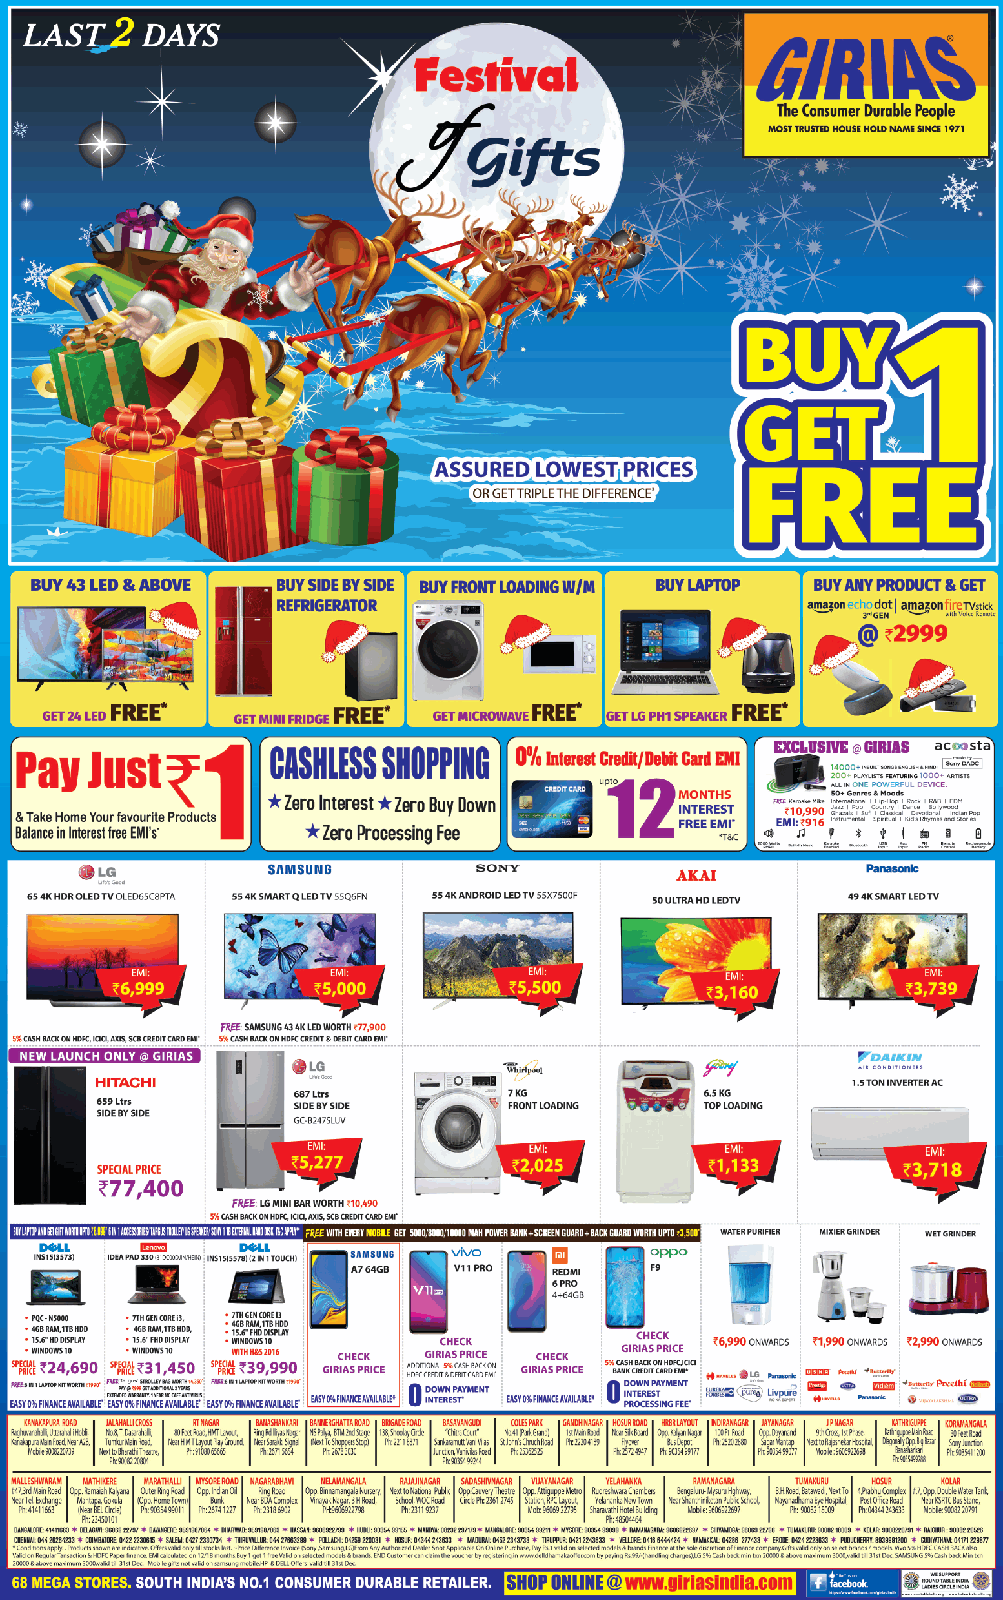 girias-festival-of-gifts-buy-1-get-1-free-assured-lowest-prices-ad-times-of-india-bangalore-01-01-2019.png